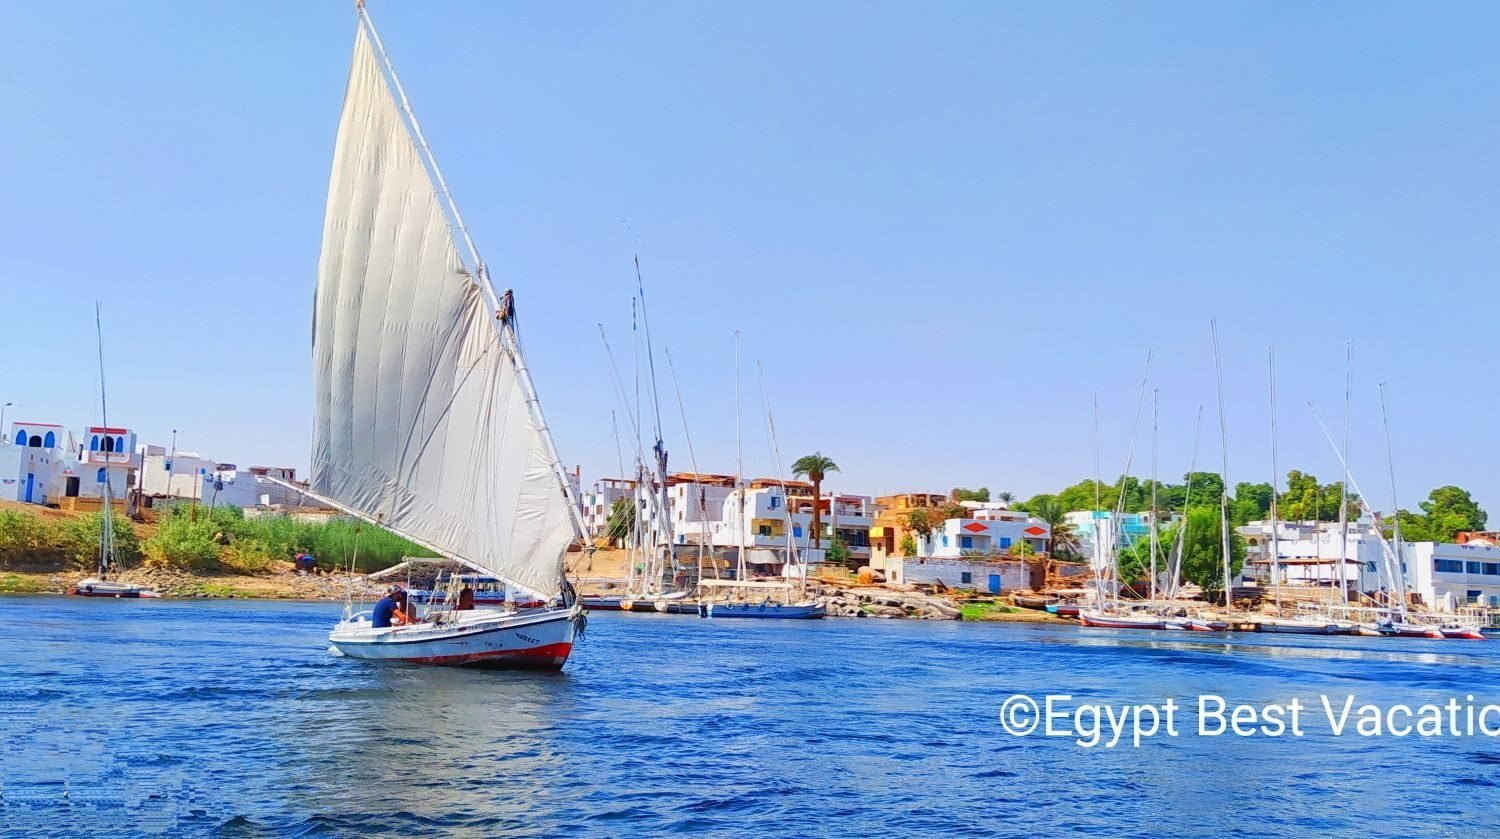 Journey through the Nile An 8-Day Felucca Cruise from Aswan to Luxor